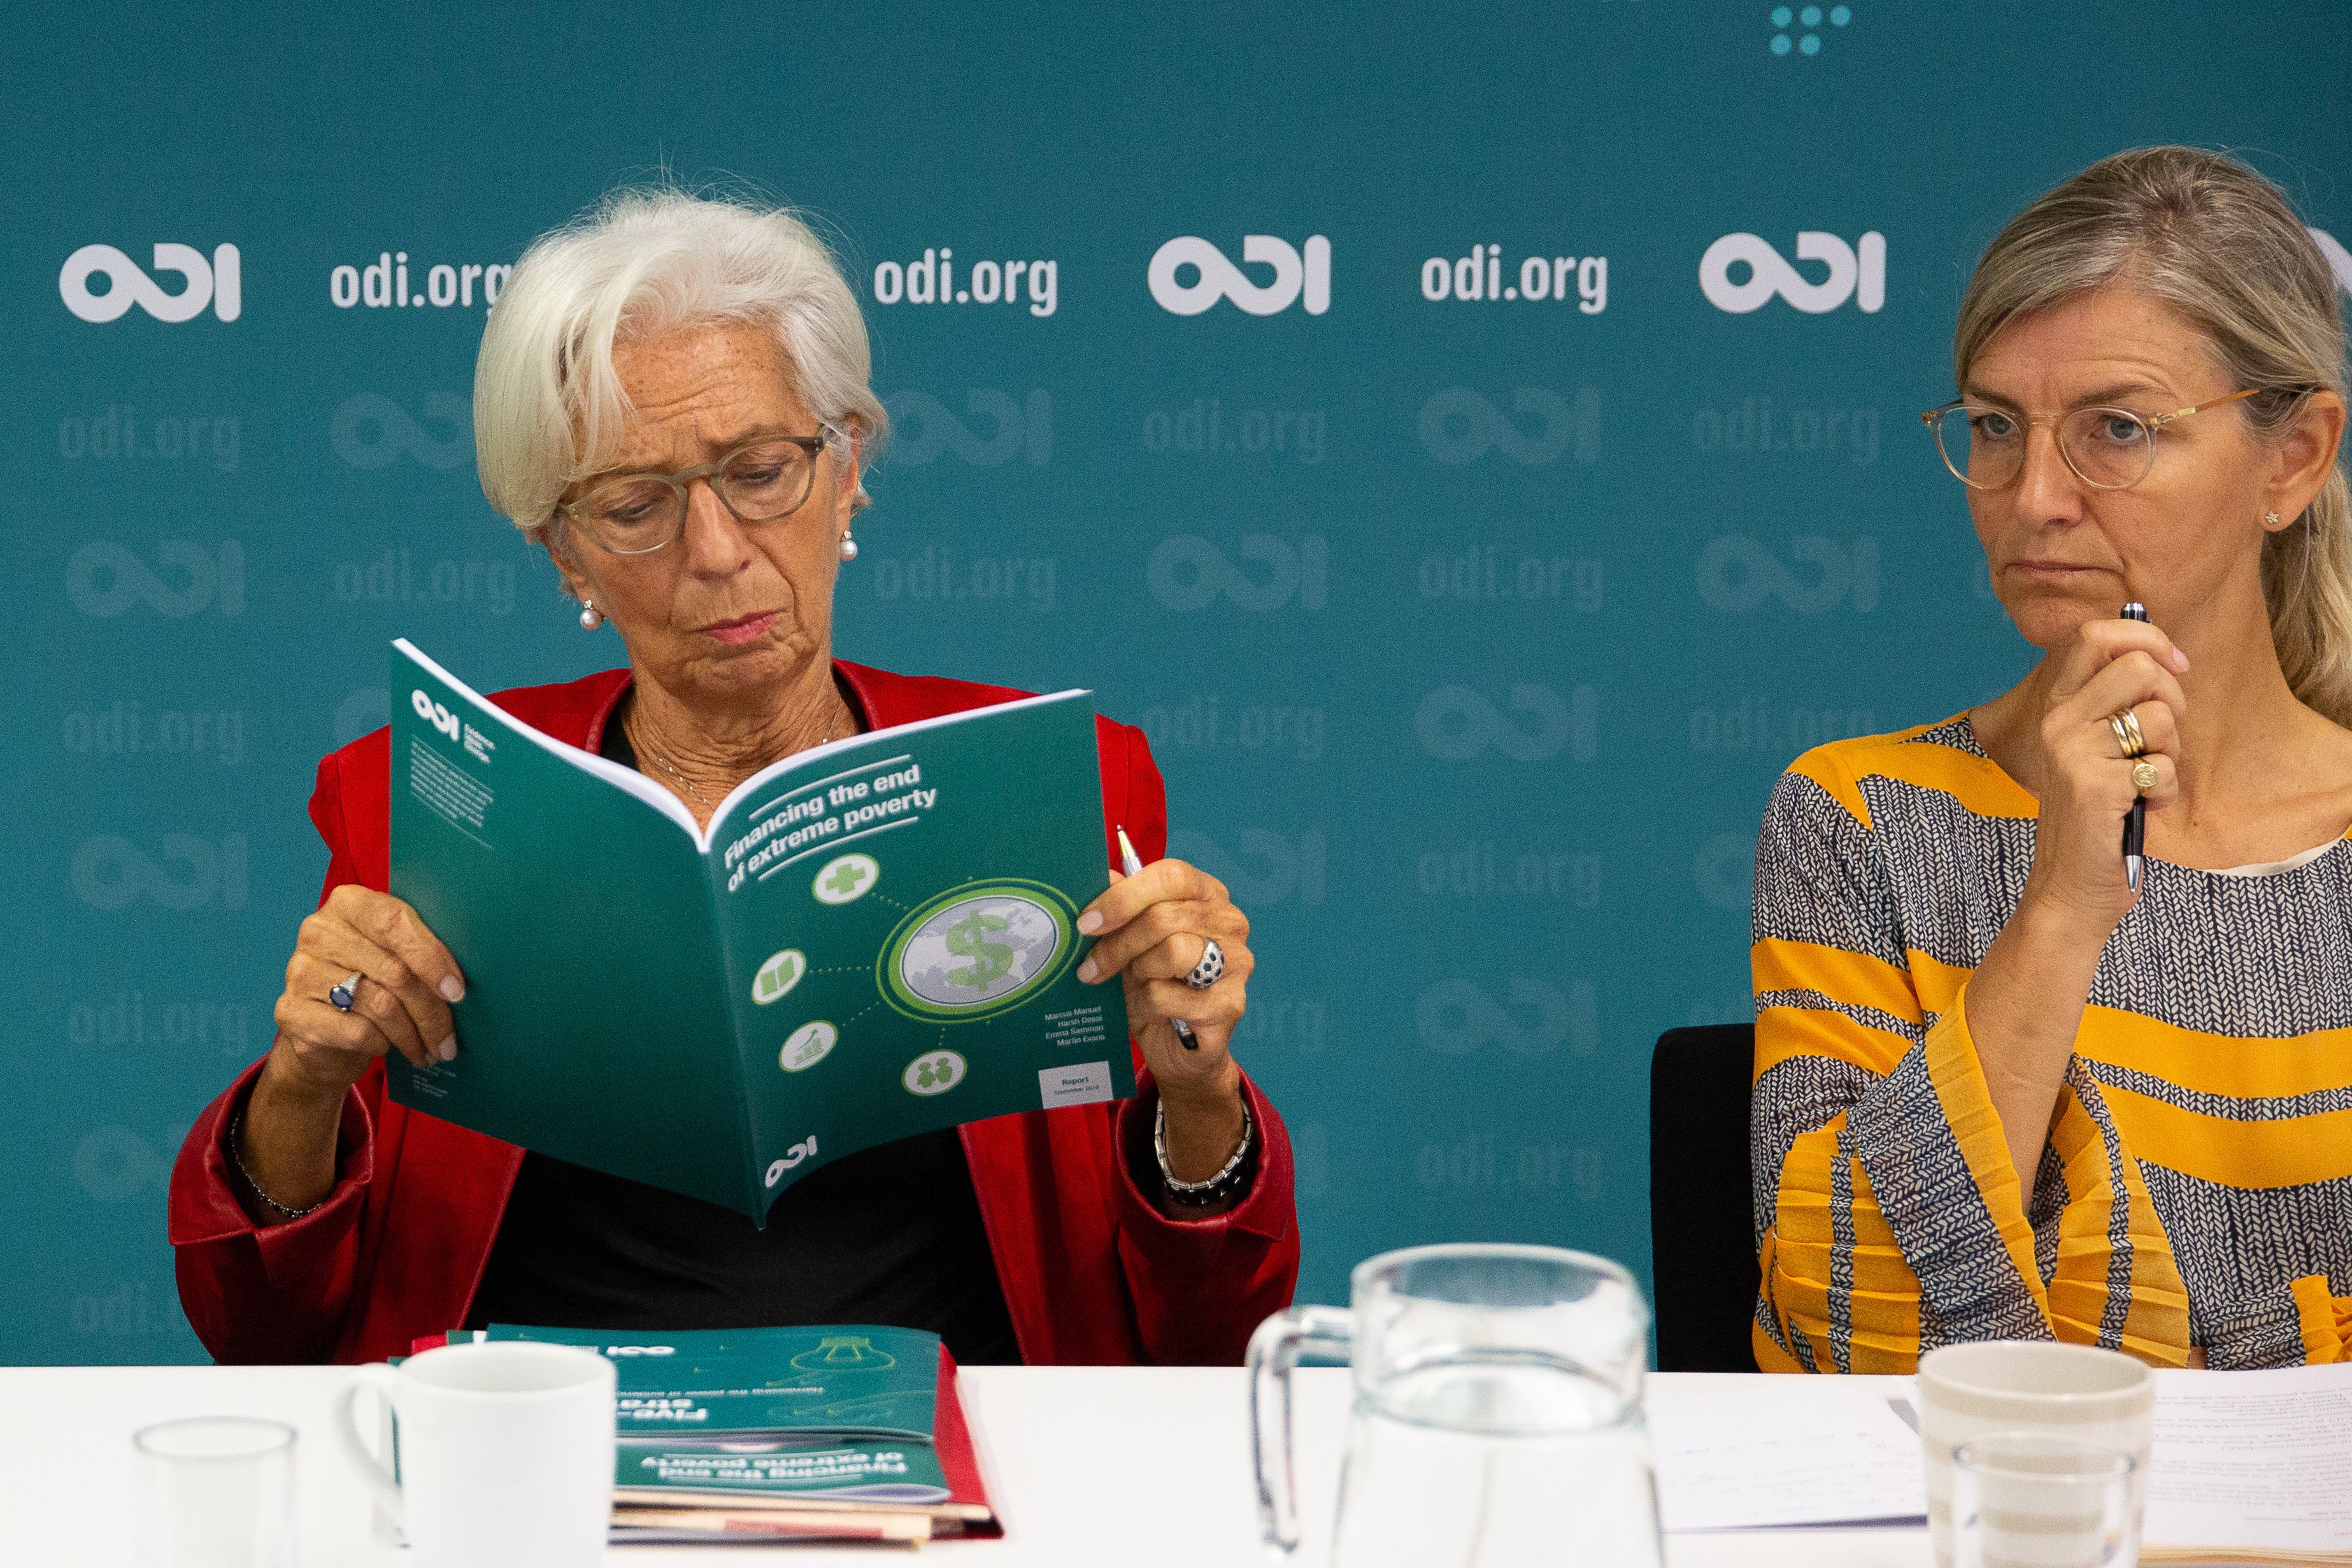 Christine Lagarde, Managing Director of the IMF, reading ODI report at a roundtable event with Ulla Tørnæs, Danish Minister for Development Cooperation © Hanna-Katrina Jedrosz 2018